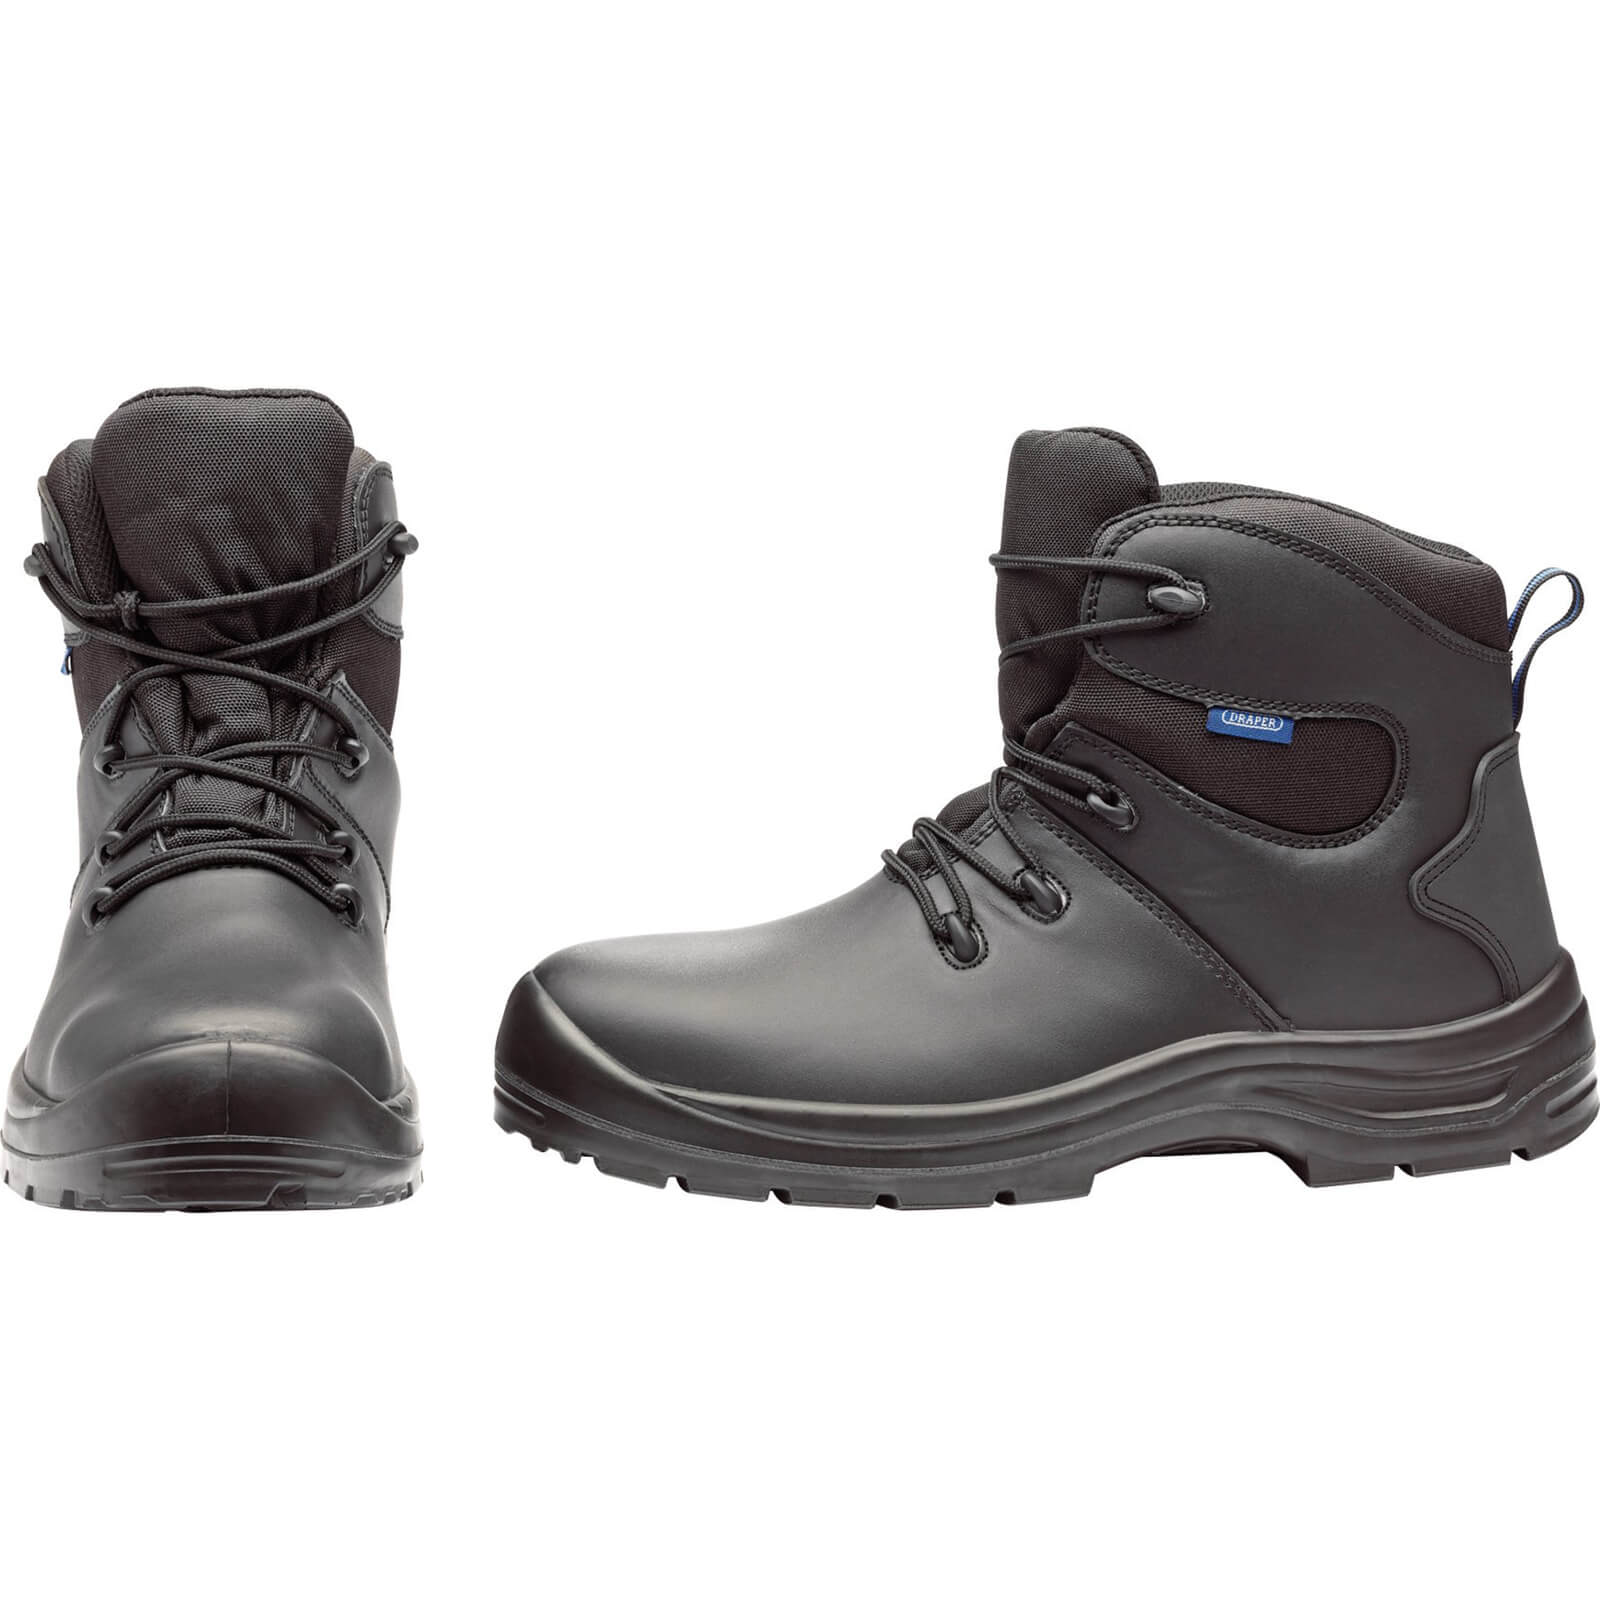 Image of Draper Mens Waterproof Safety Boots Black Size 10